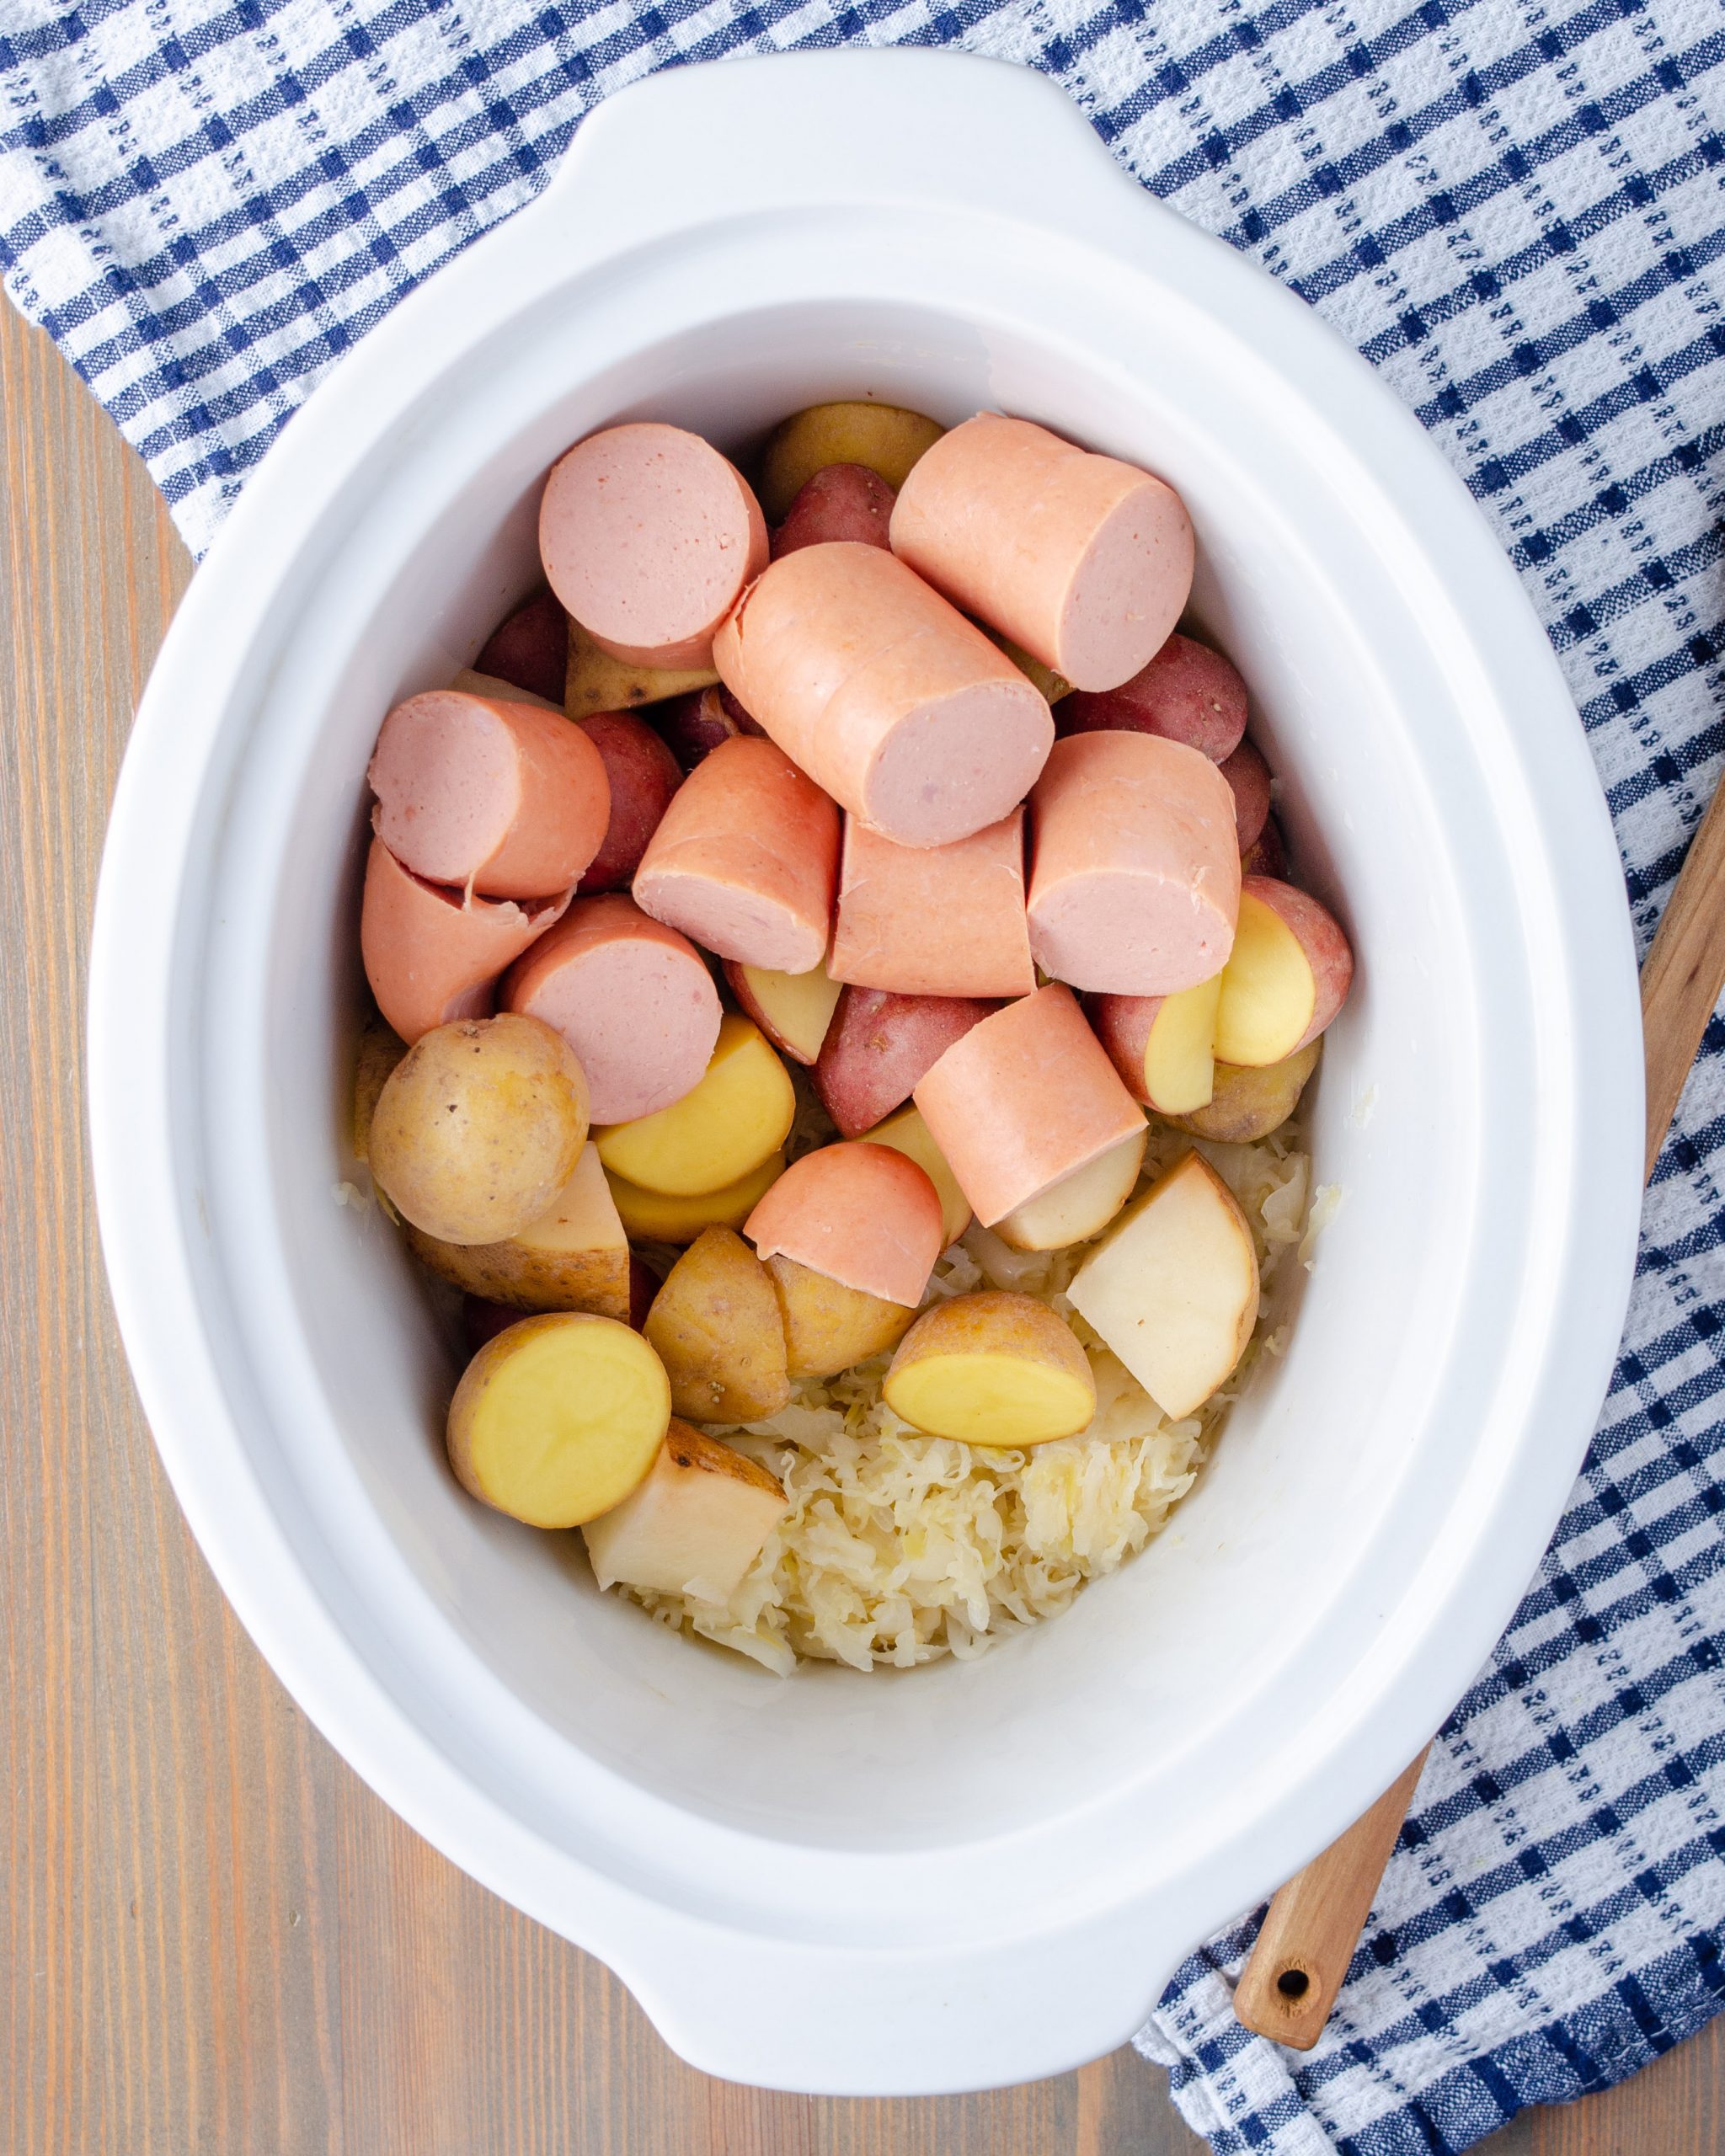 Cover the sauerkraut with the potatoes and then the sausage.